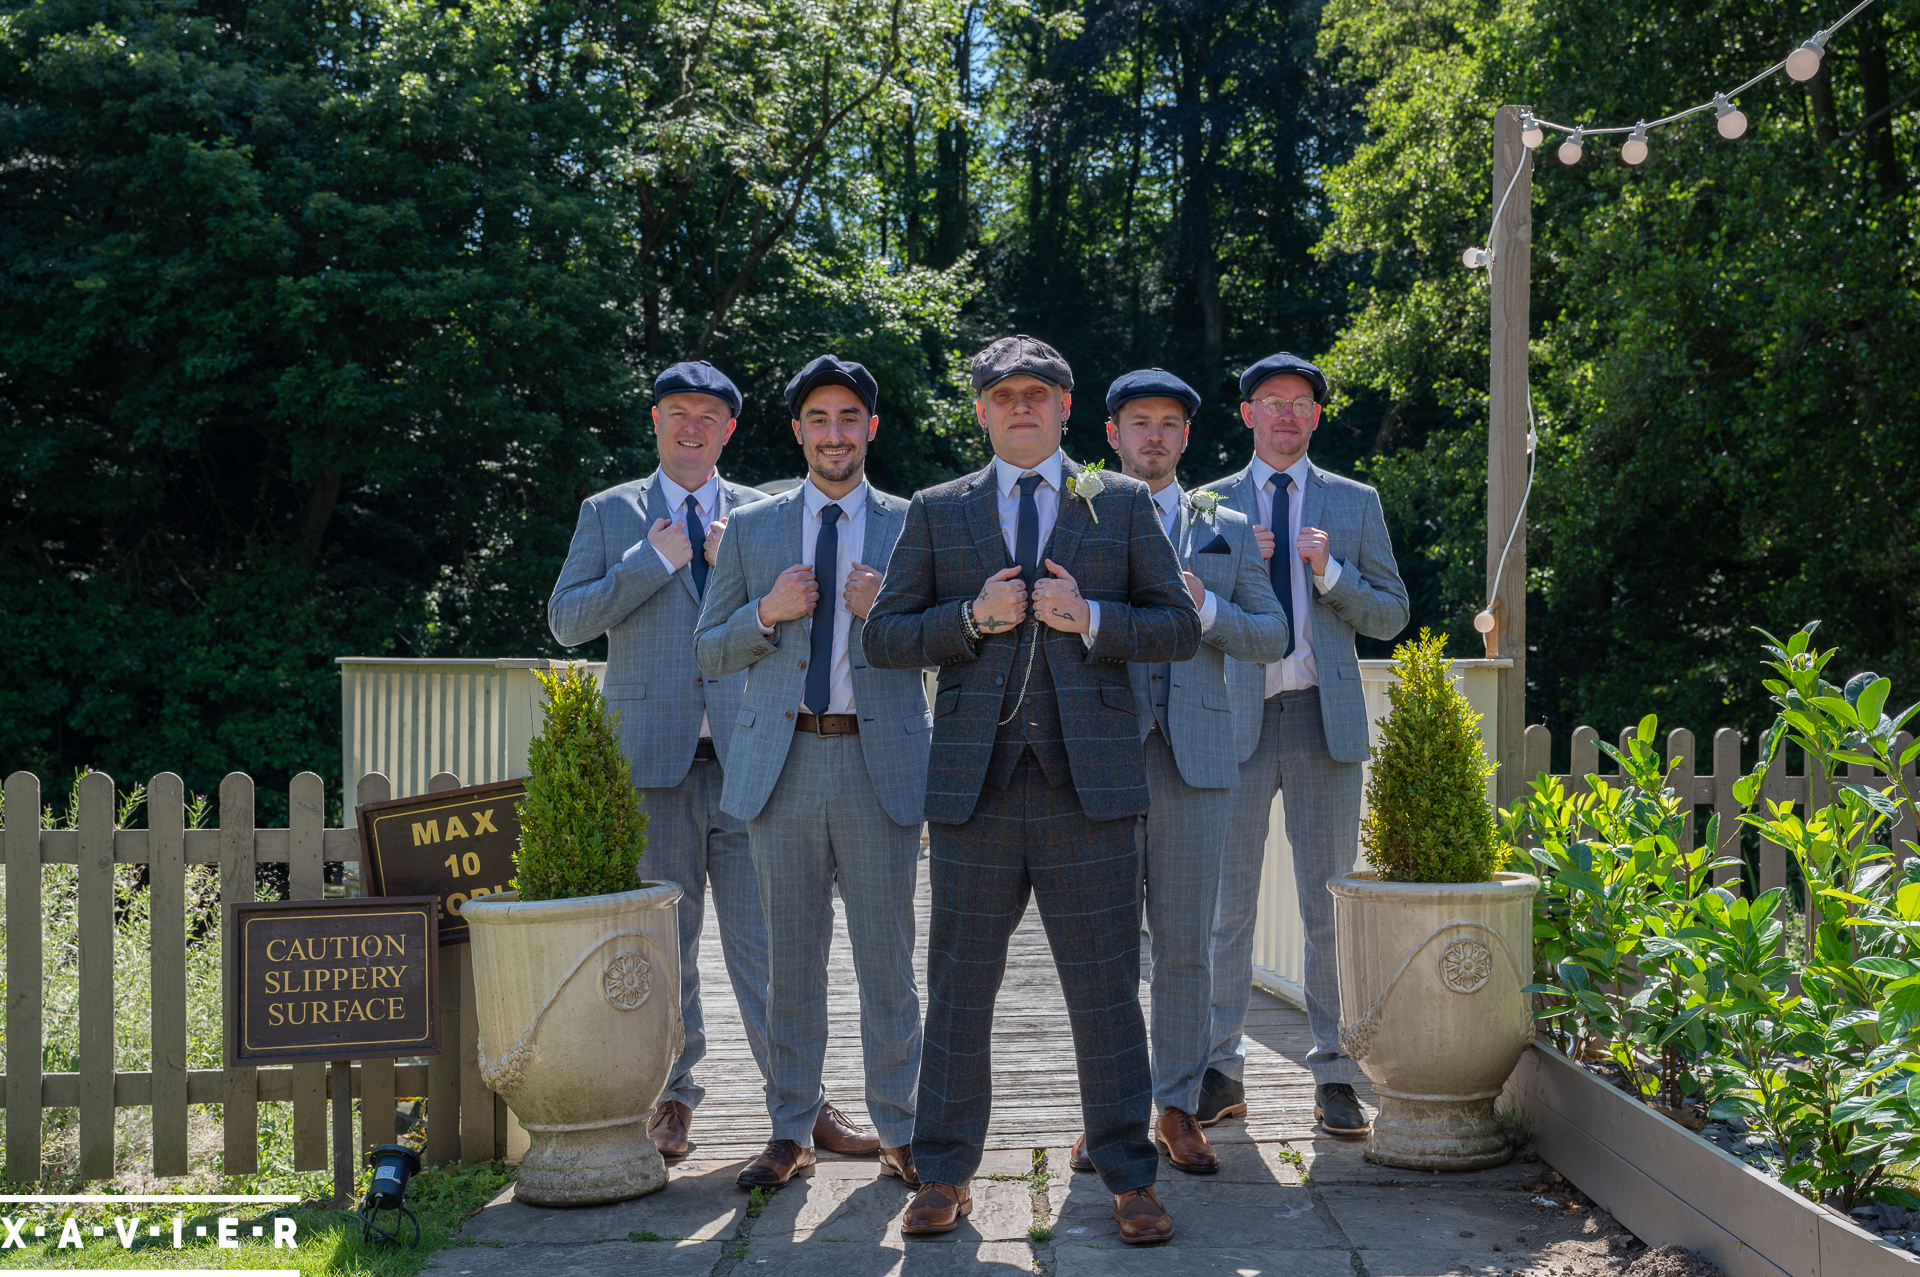 the groomsmen are posing in suits and flatcaps